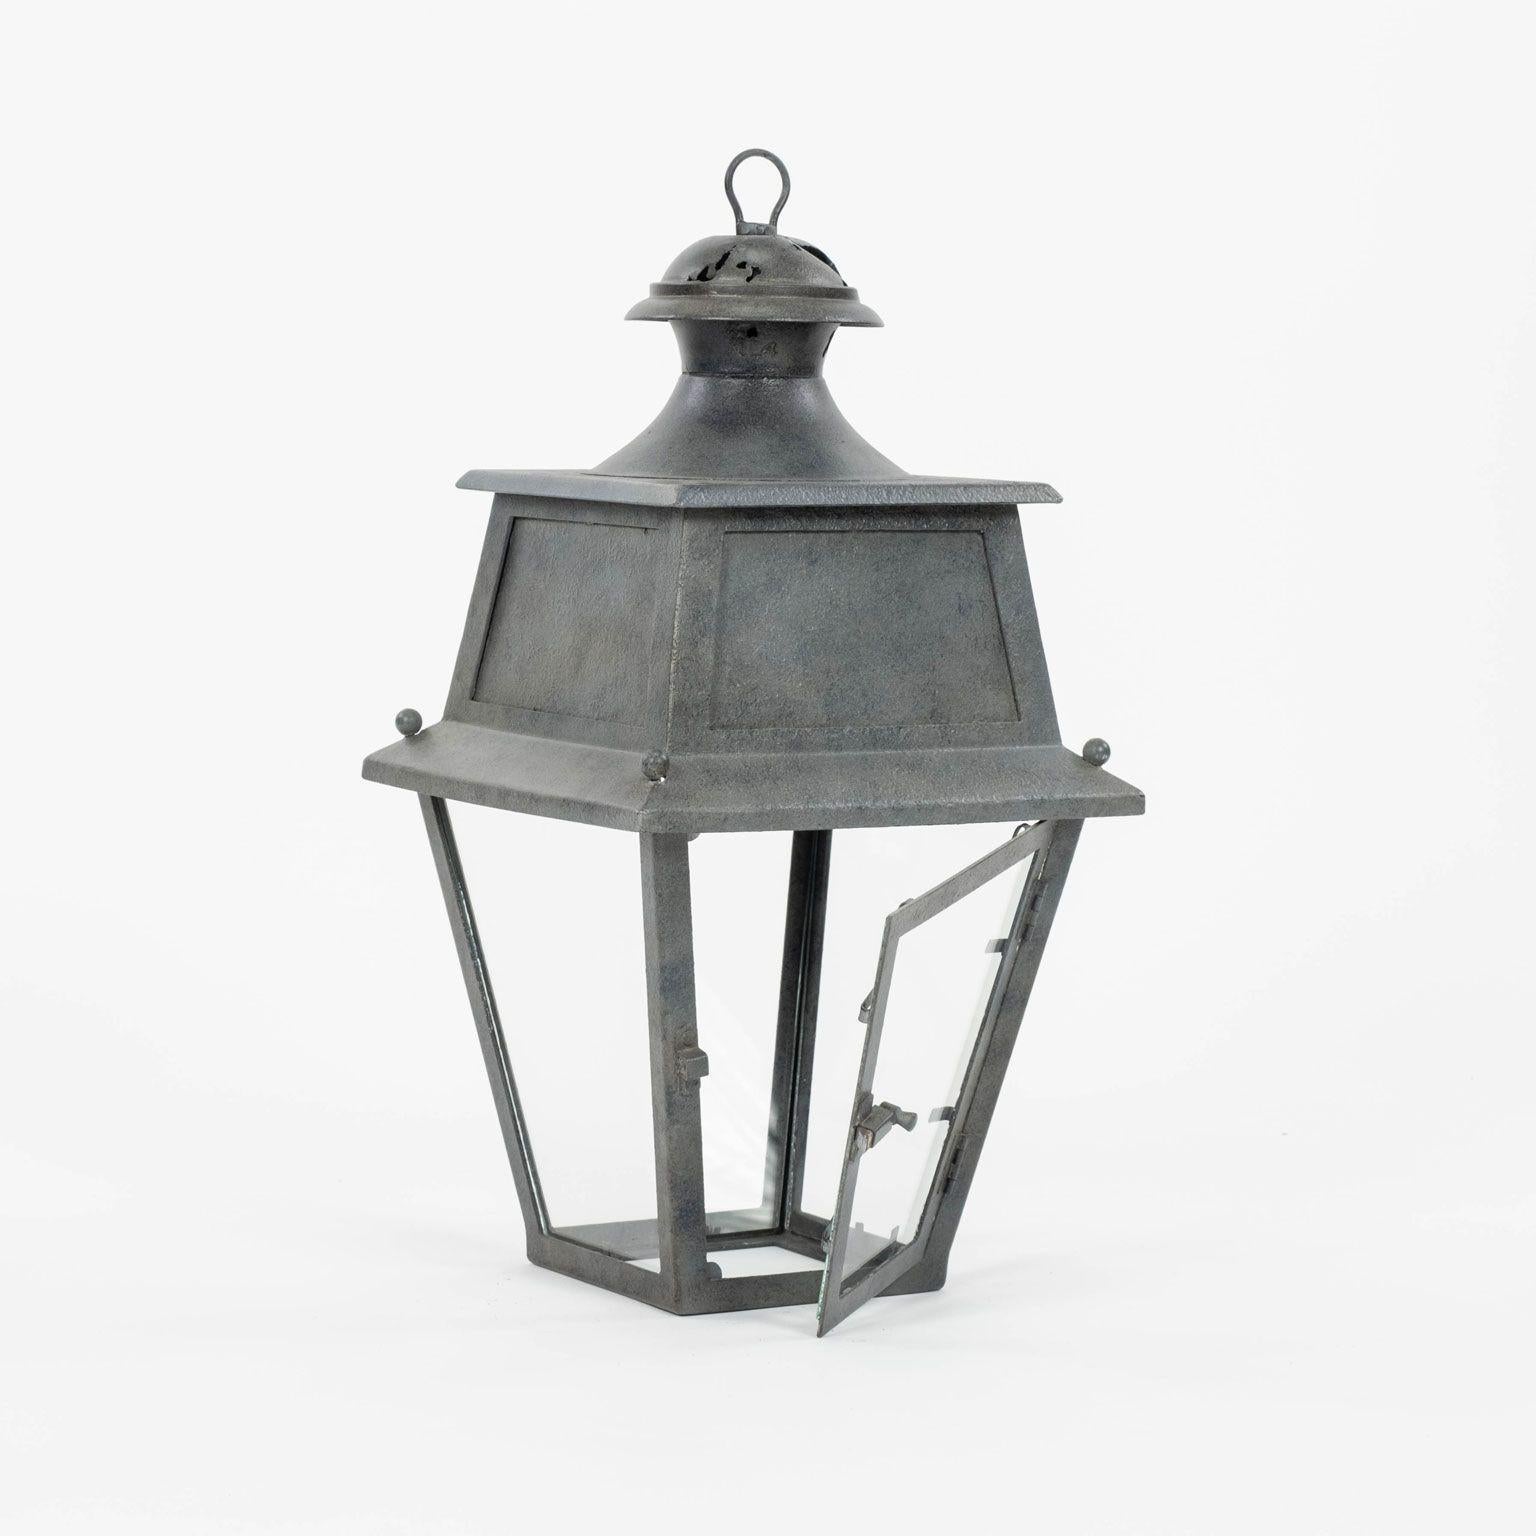 Tole, glass and iron lantern dating to early 20th century, France. Not wired for electricity, but can be wired, or fitted for usage with gas, for an additional cost. Includes chain and a canopy (listed height does not include chain). Restored finish